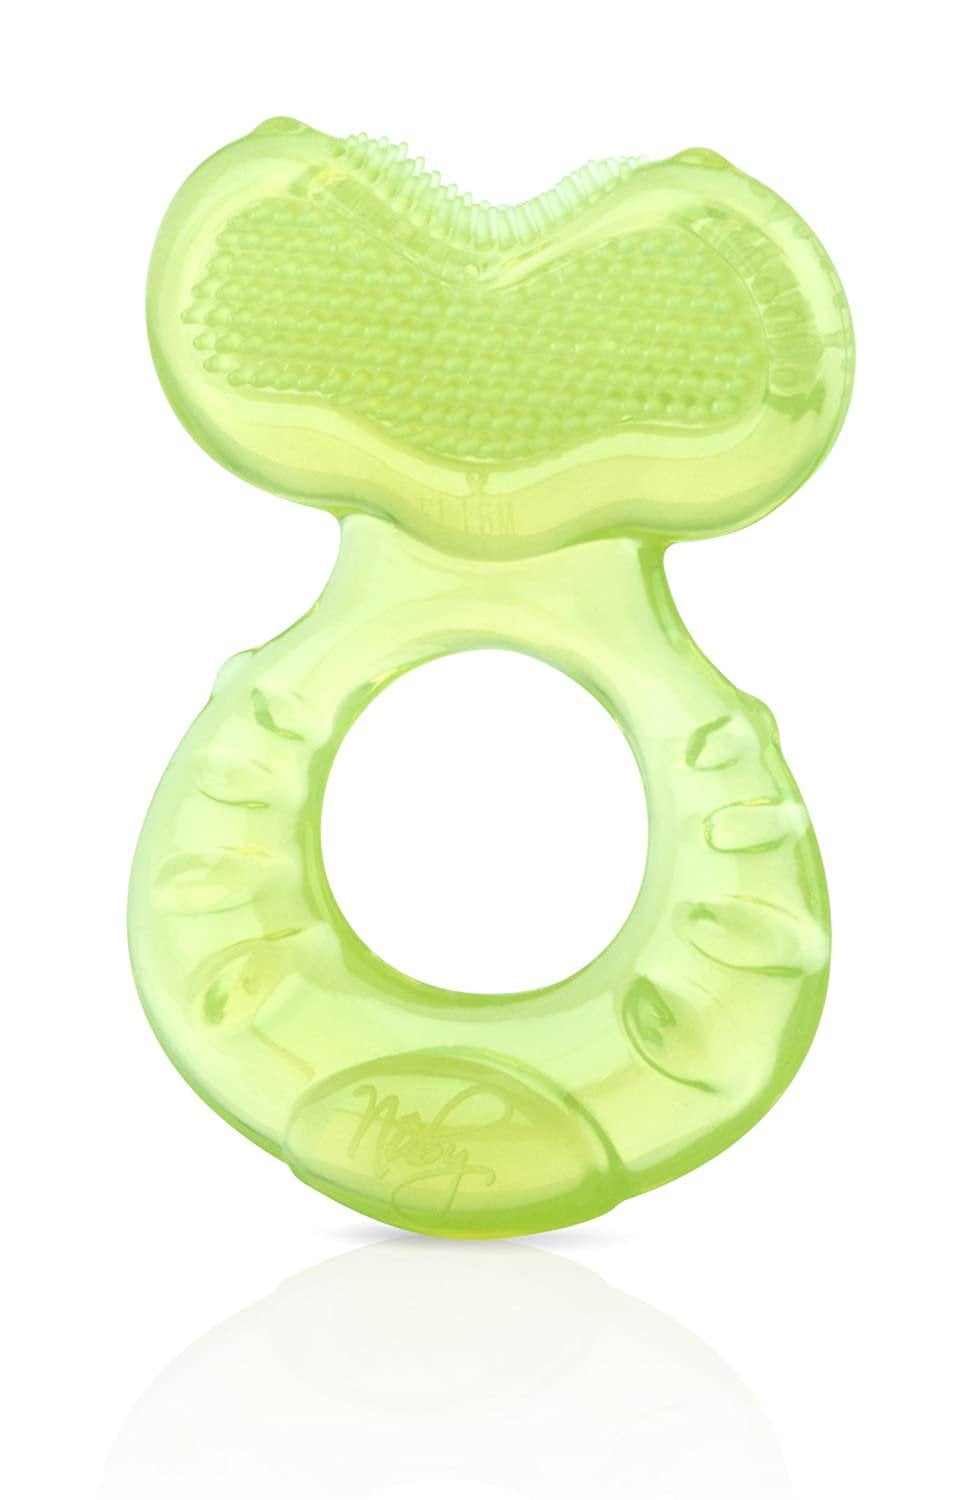 Oogiebear 360 Seafoam Teether - Safe Teething Toys for Babies 3 Months and Older, Green